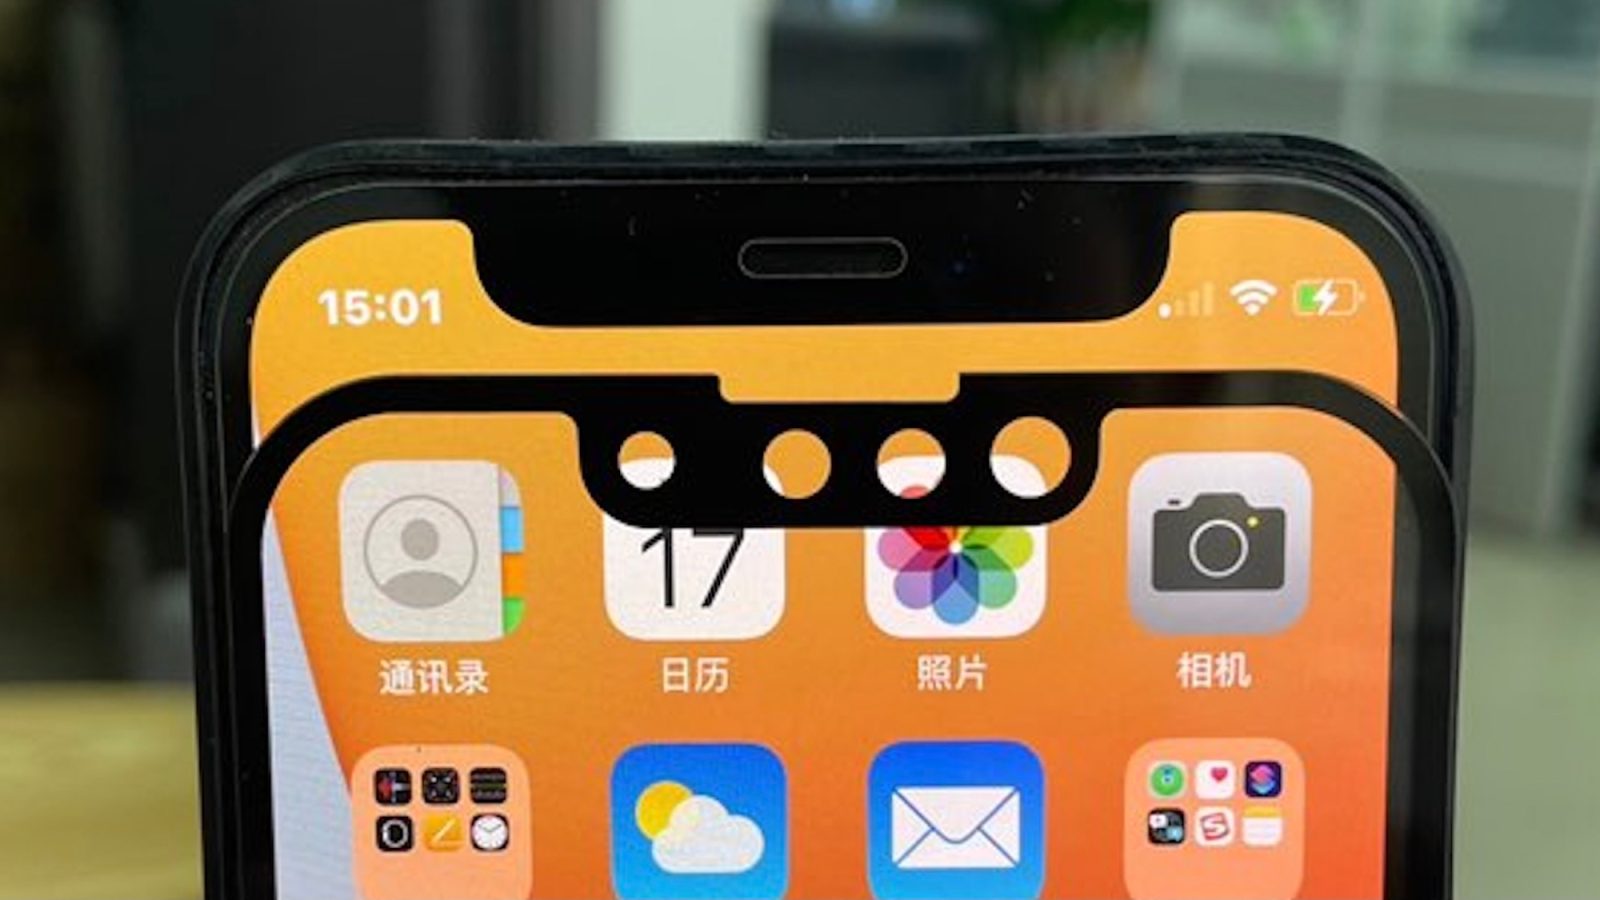 New photos claim to show smaller iPhone 13 notch compared to iPhone 12 -  9to5Mac